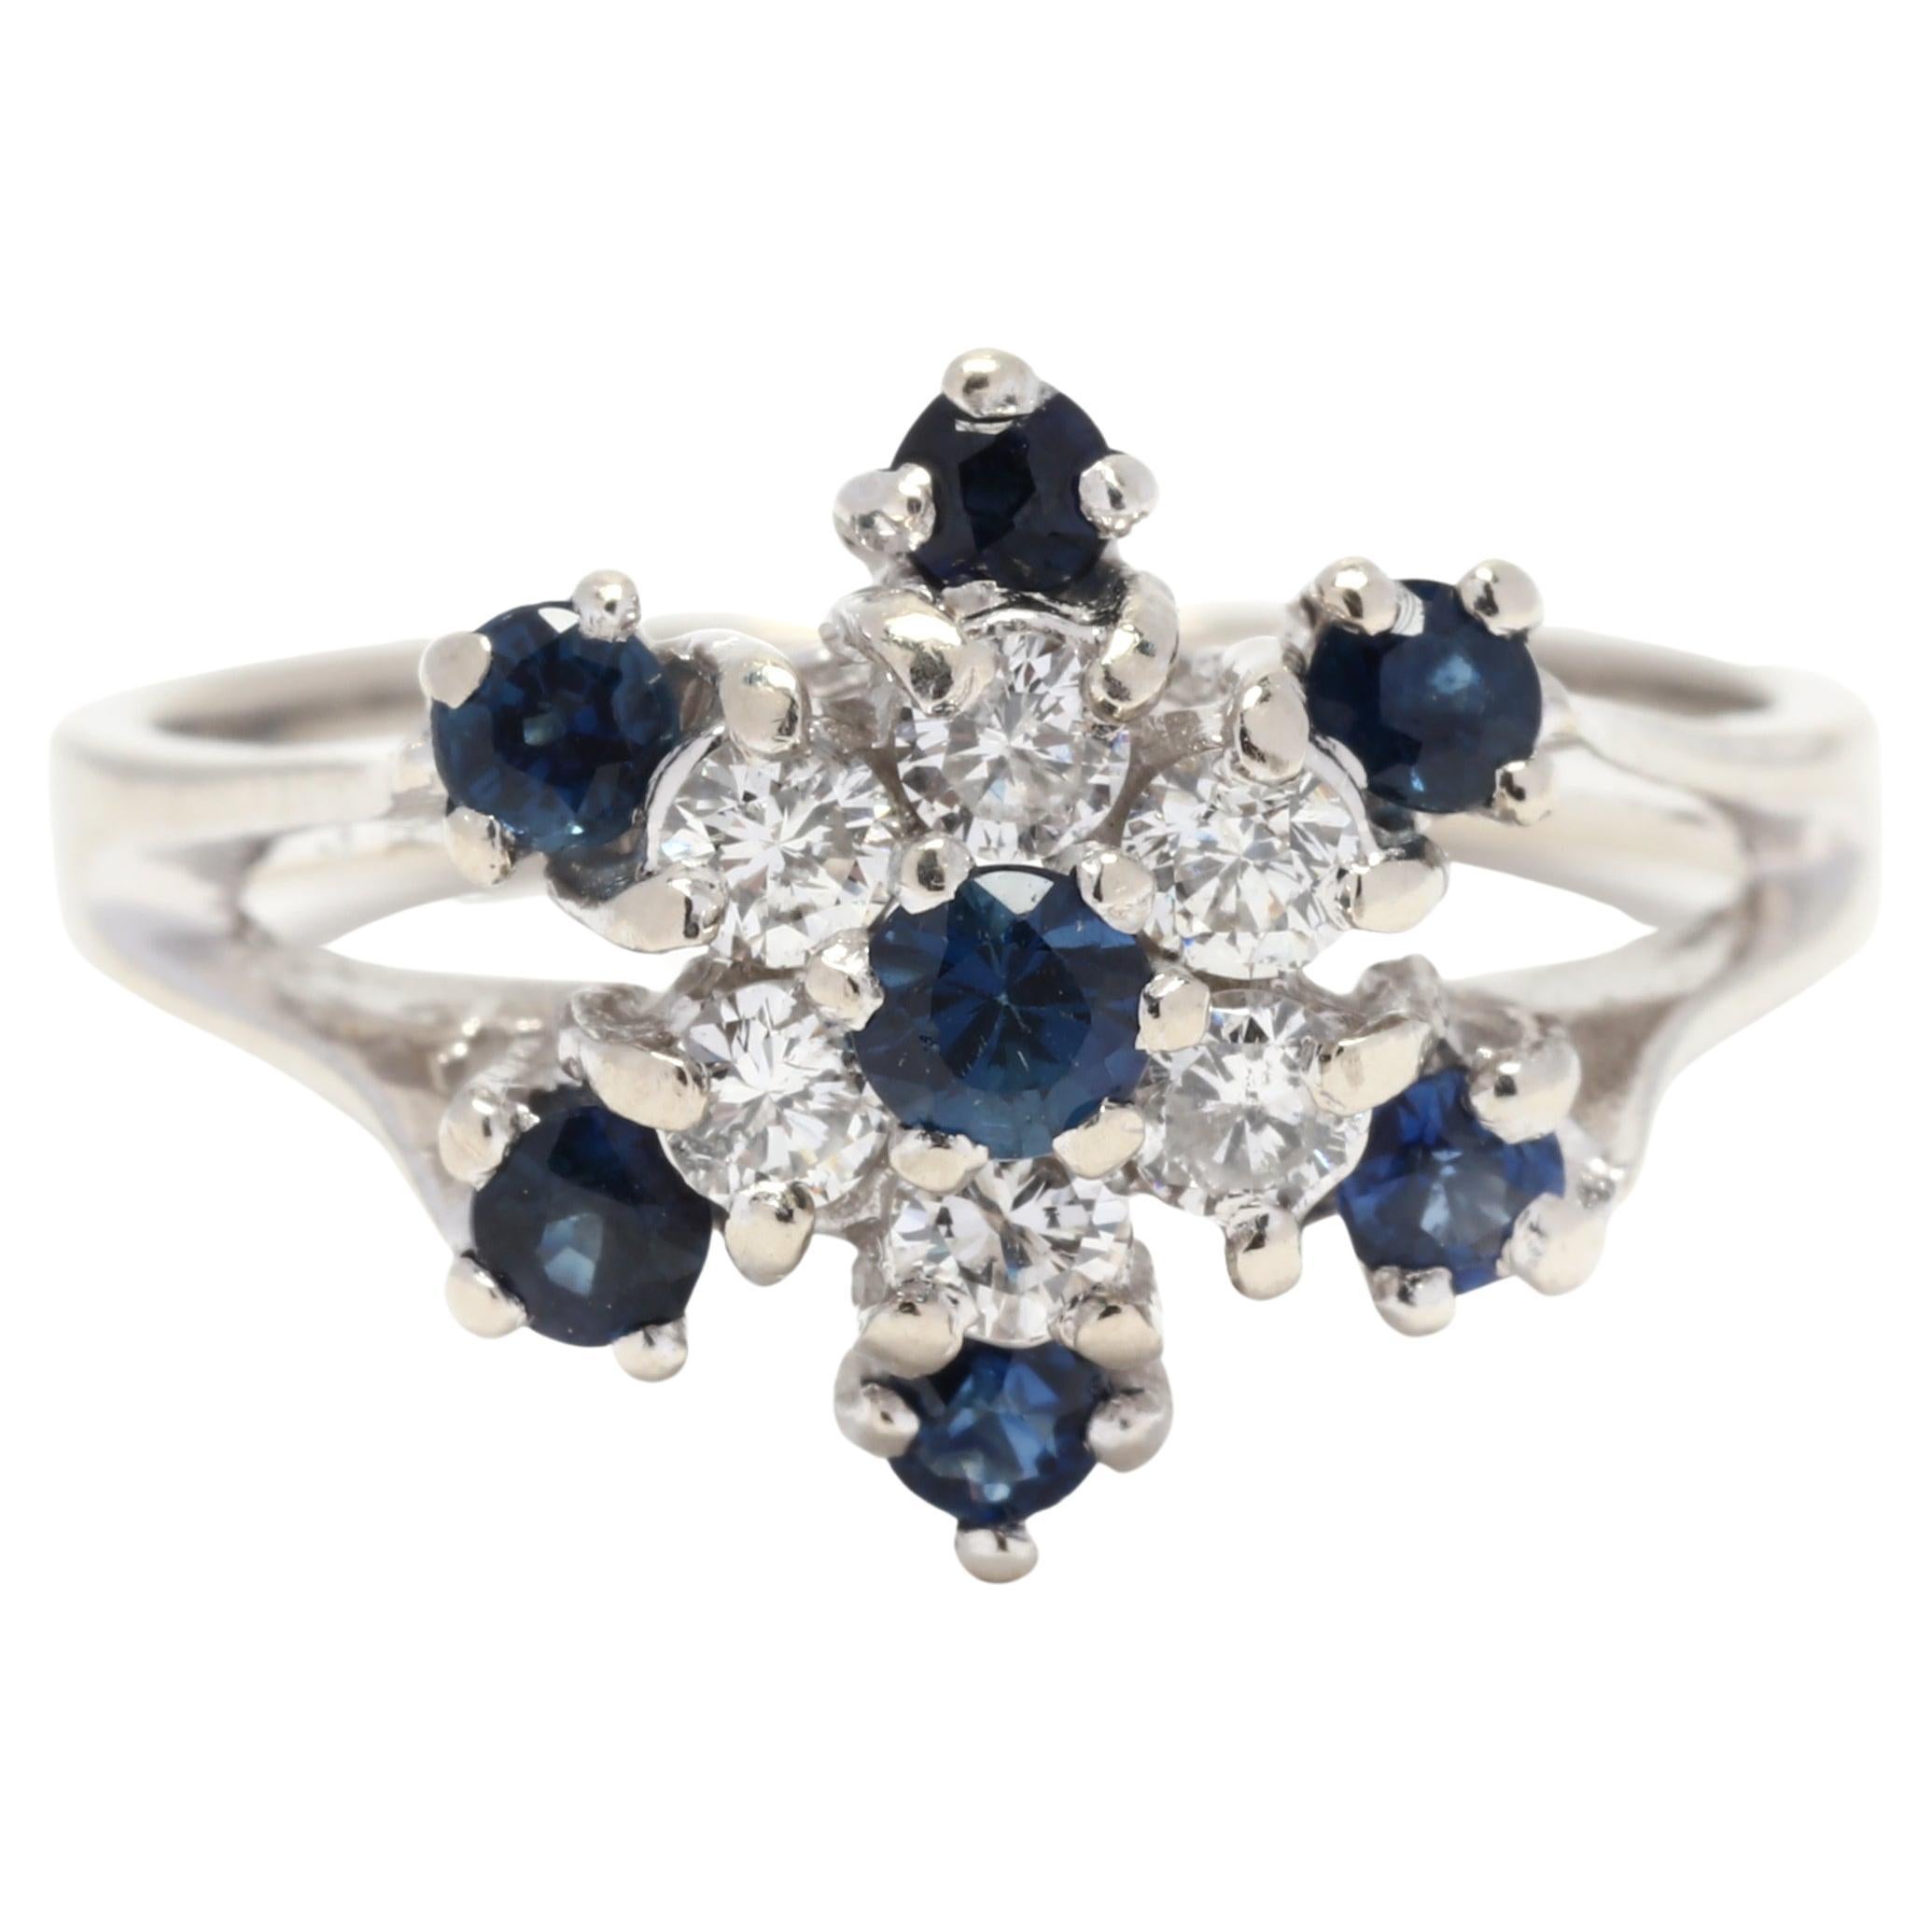 Sapphire Diamond Cluster Cocktail Ring, 14K White Gold, Ring Size 6